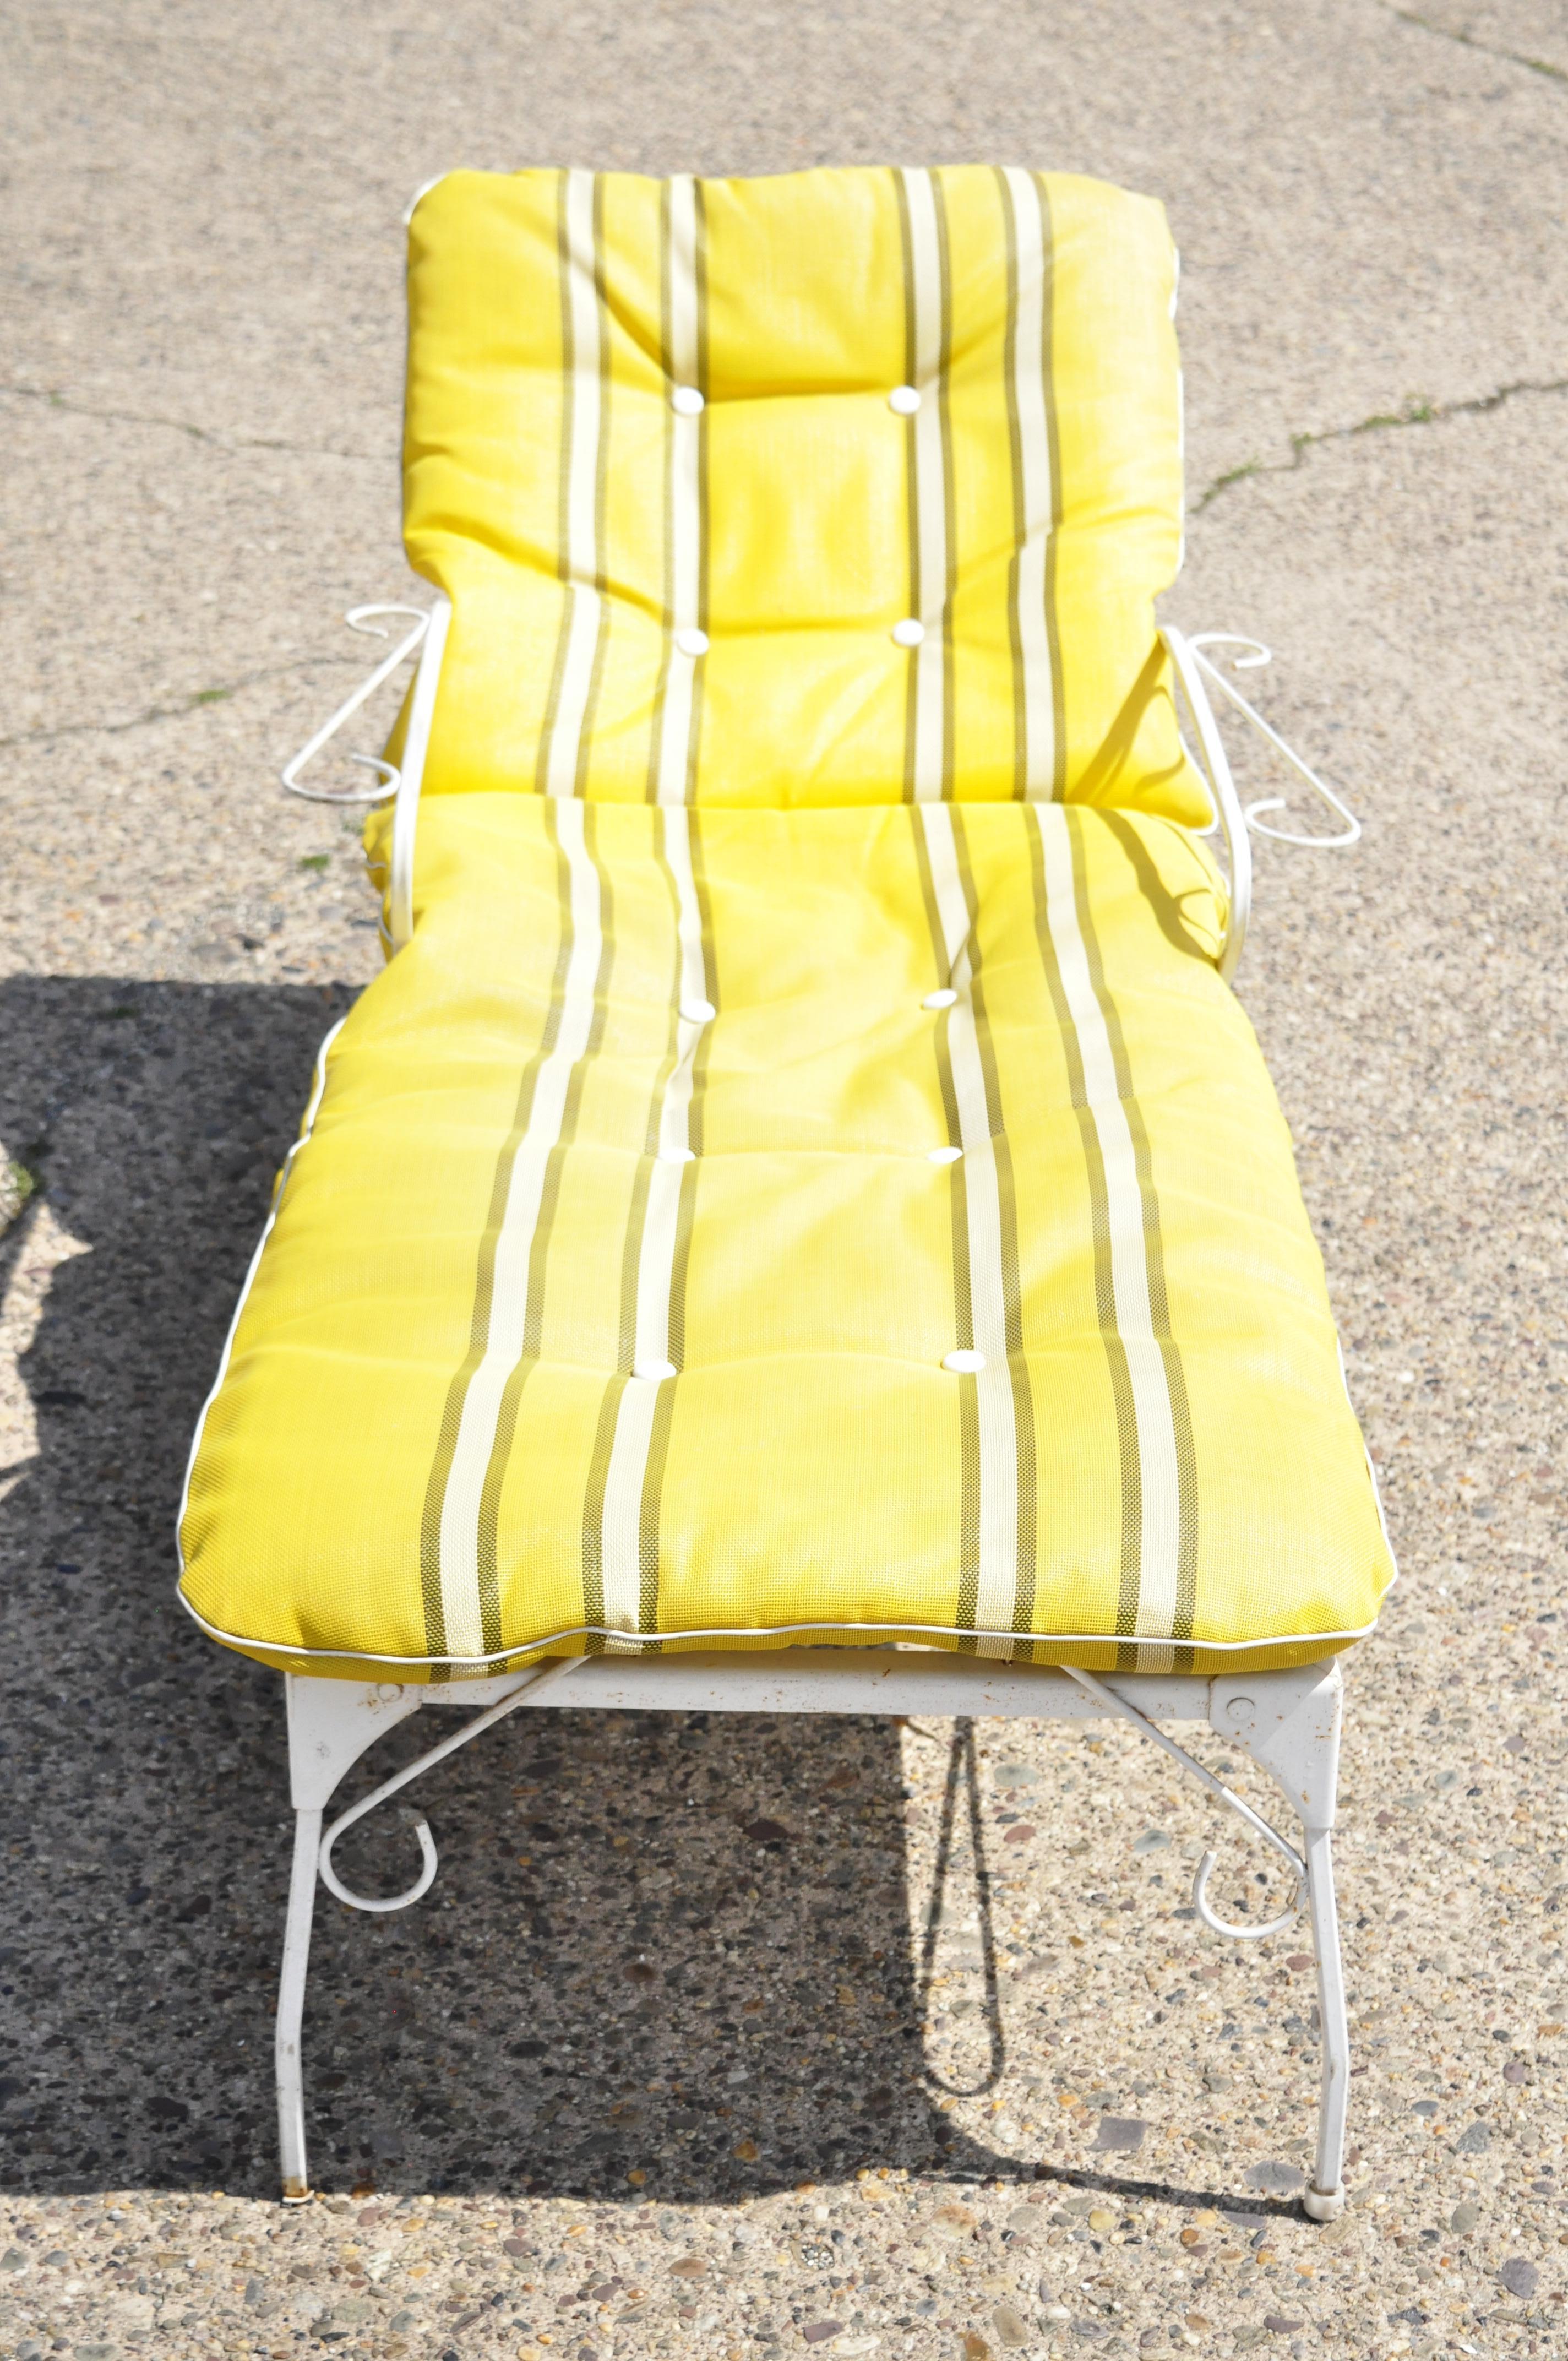 Vintage Wrought Iron Garden Patio Adjustable Chaise Lounge Chair Yellow Cushion 3